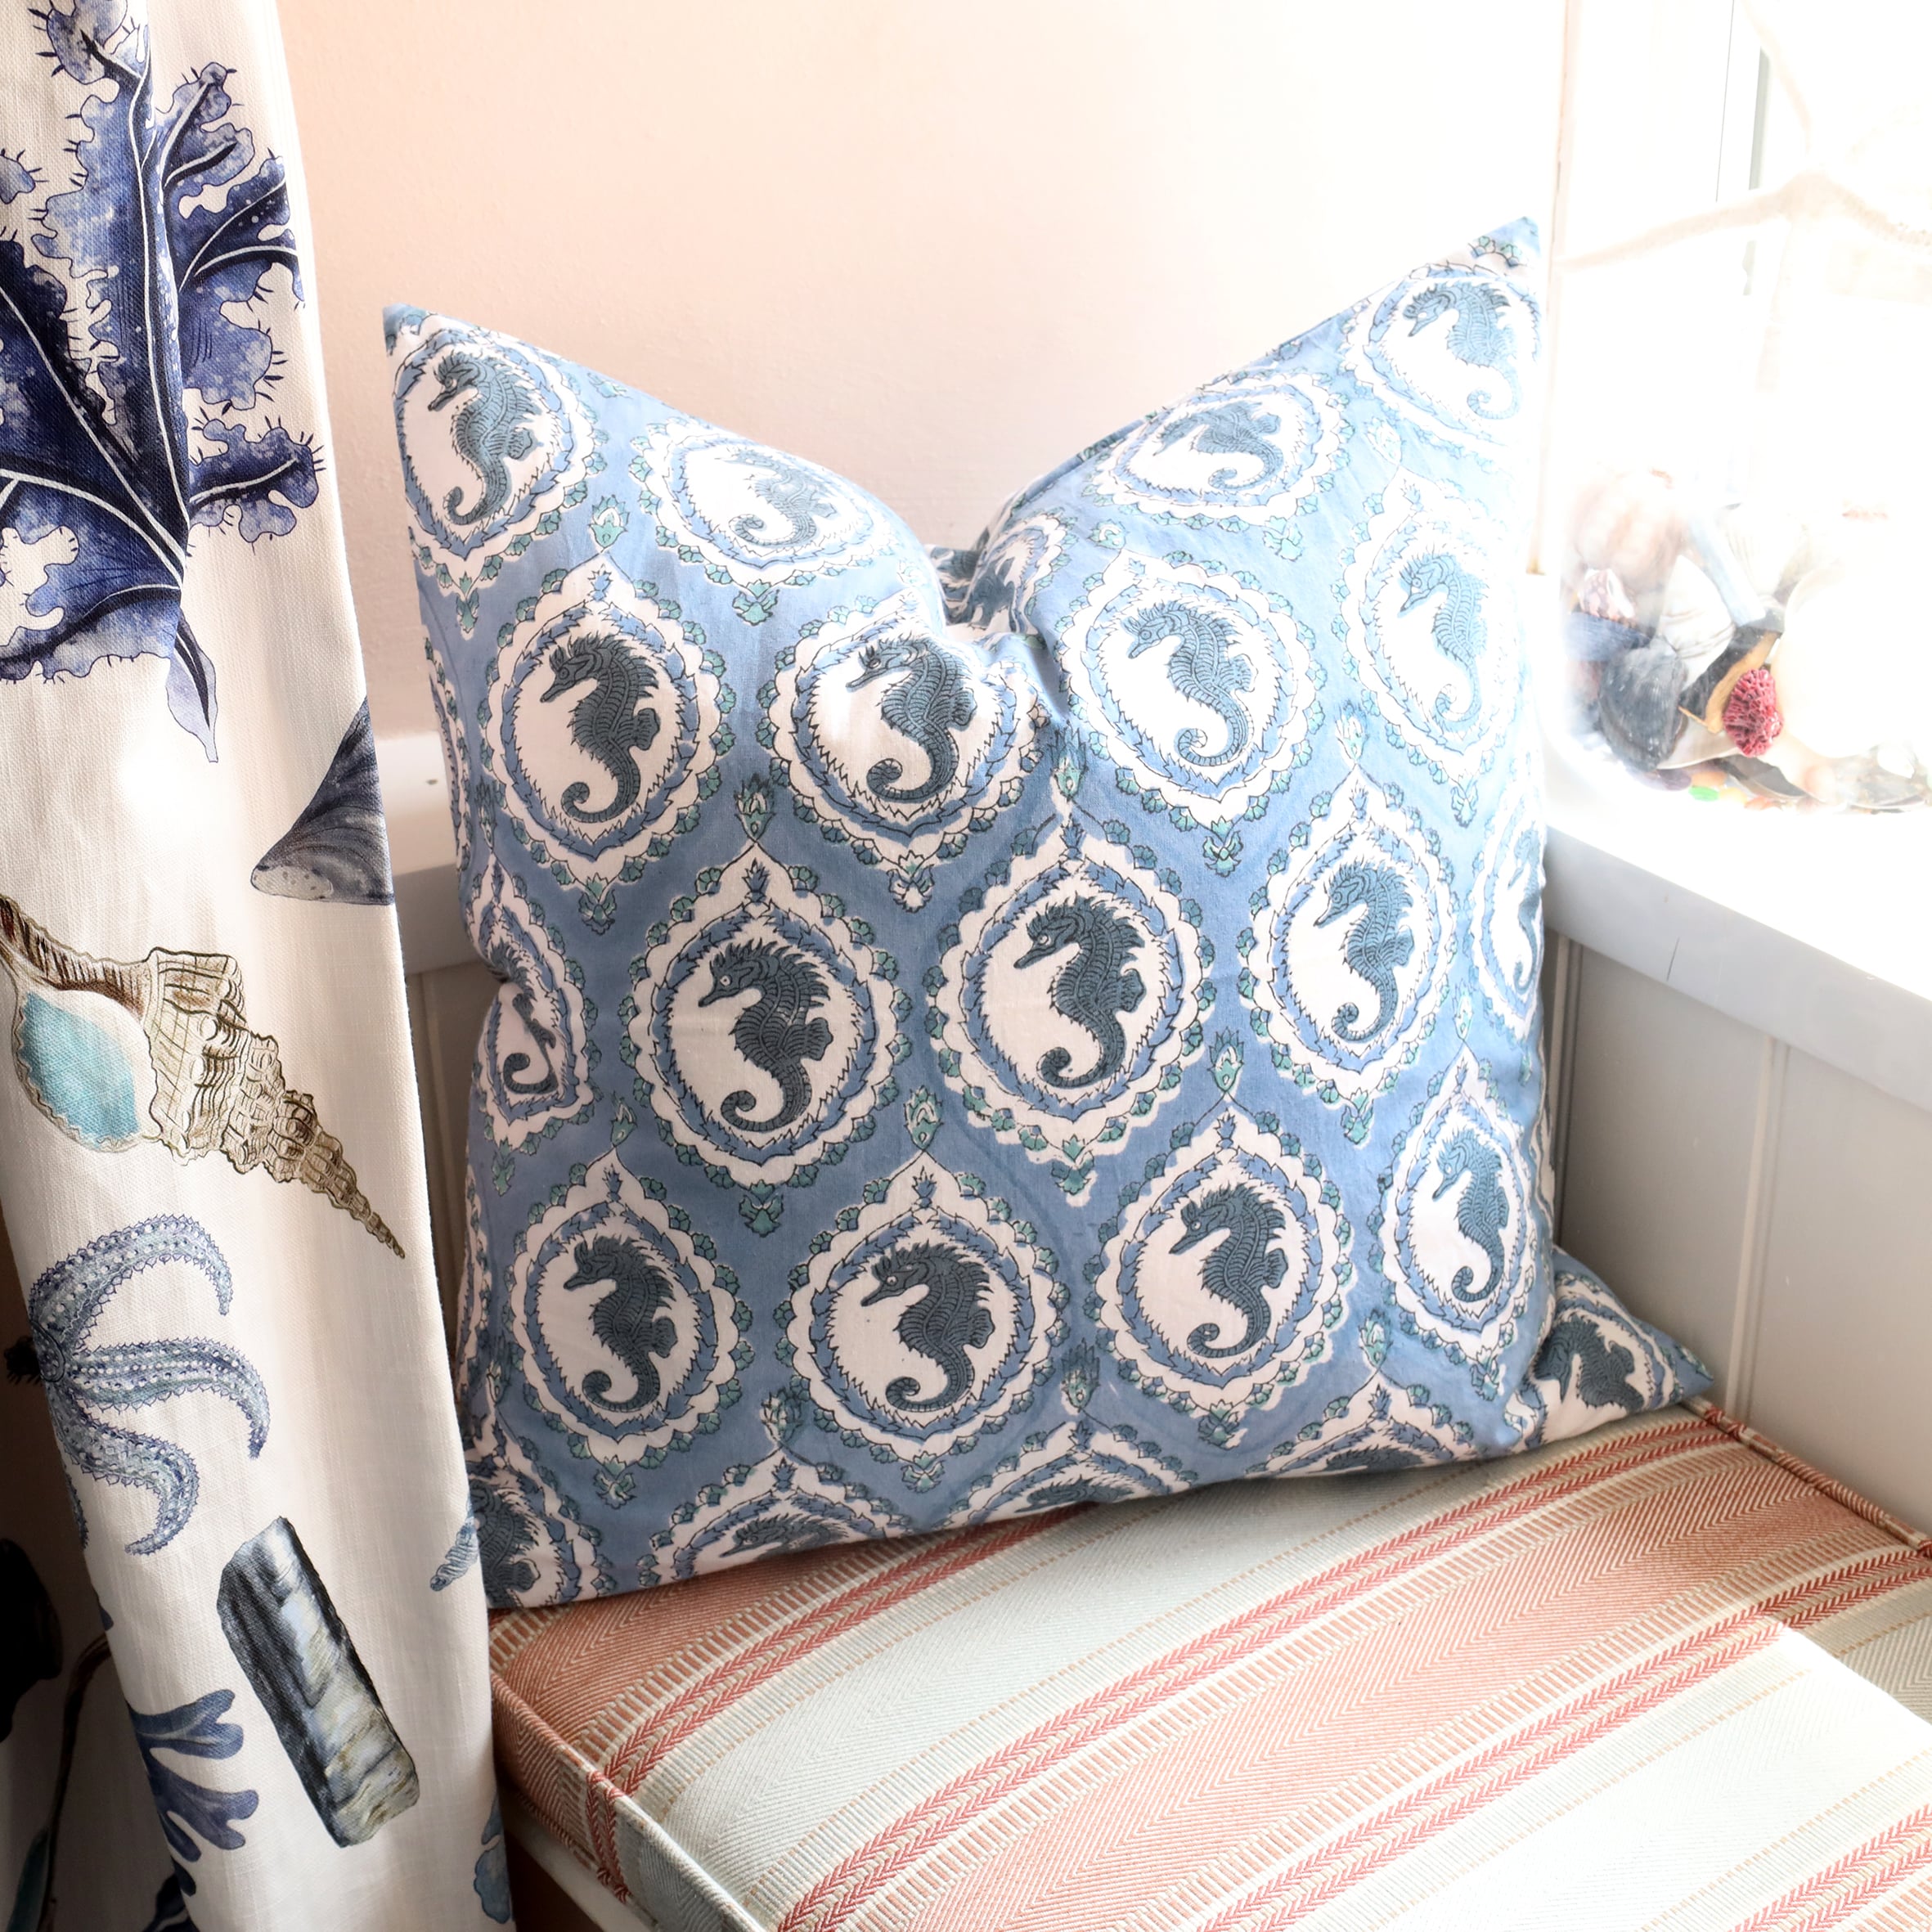 Ocean Blue Seahorse cushion which is Hand block printed fabric in a  blue and navy seahorse in a cameo design on a window seat.On the window ledge is a jar of shells on the window ledge